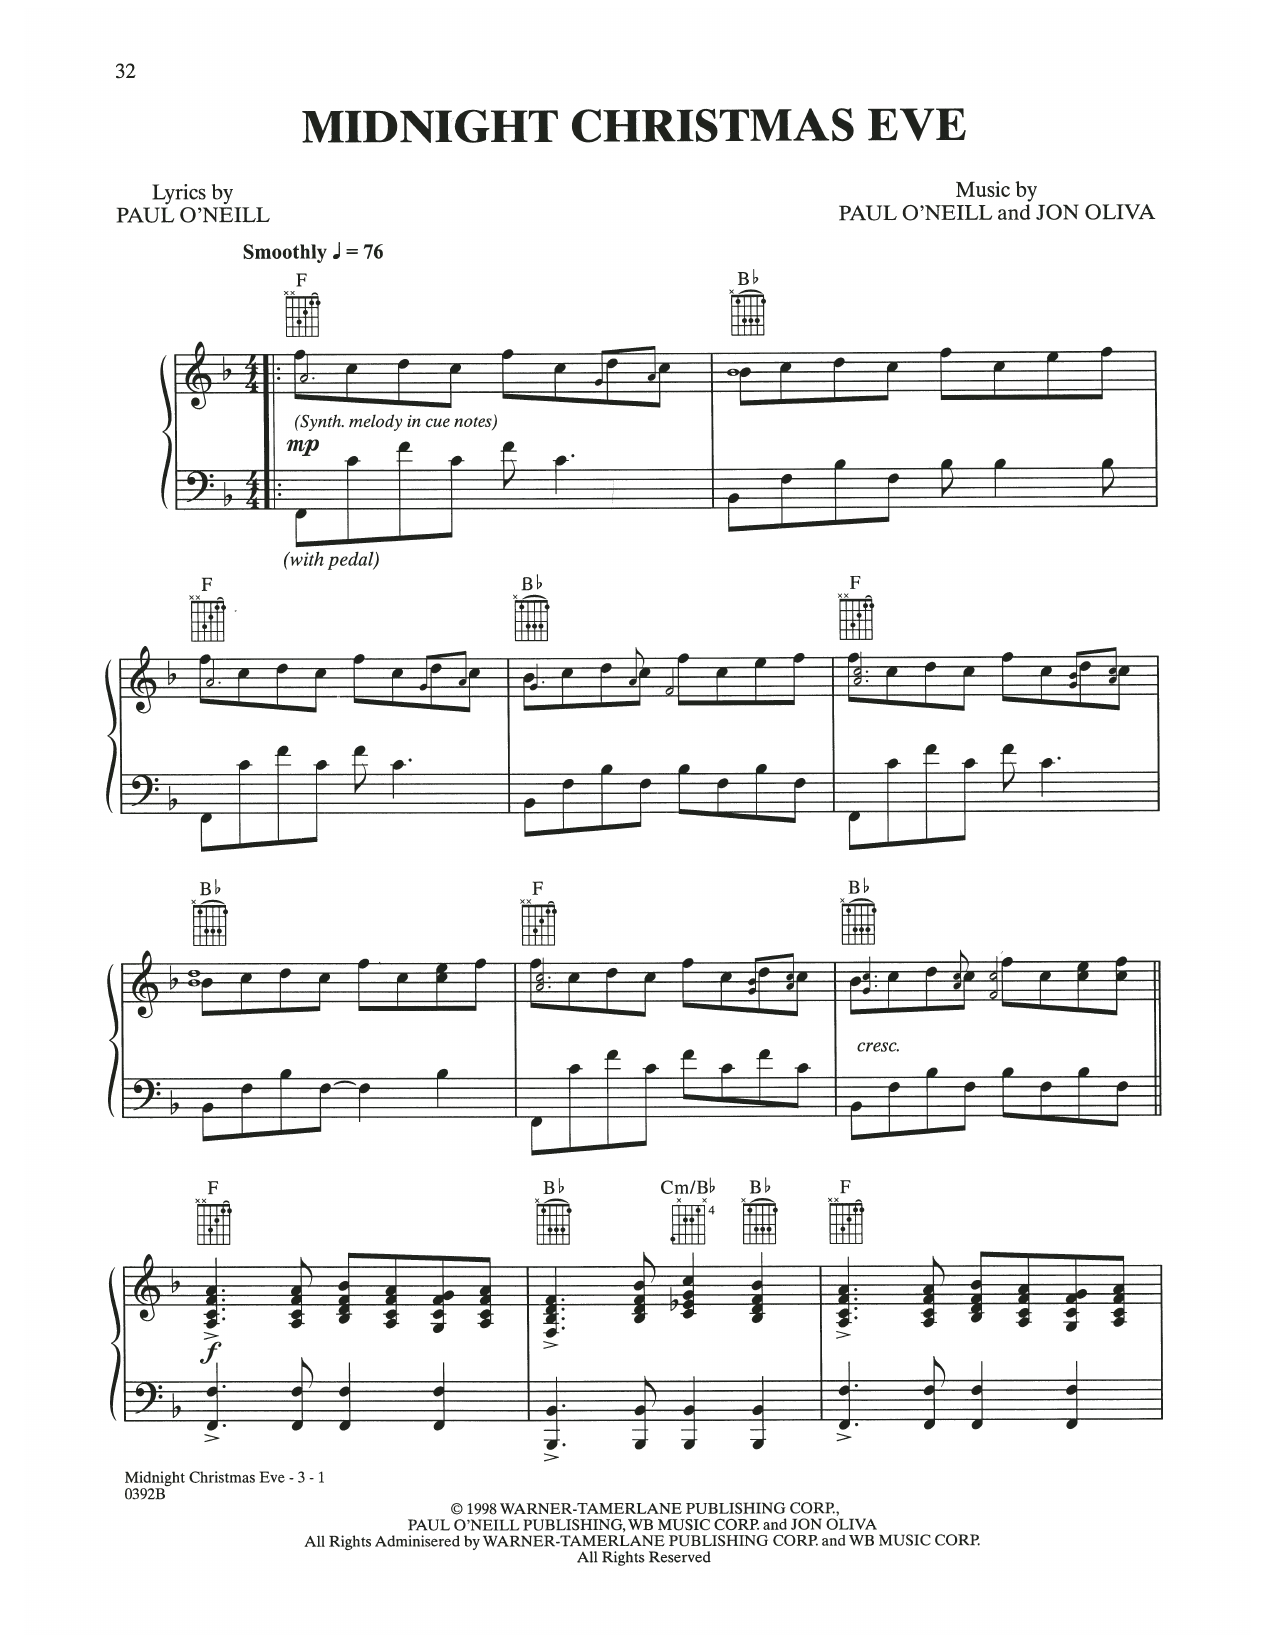 Download Trans-Siberian Orchestra Midnight Christmas Eve Sheet Music